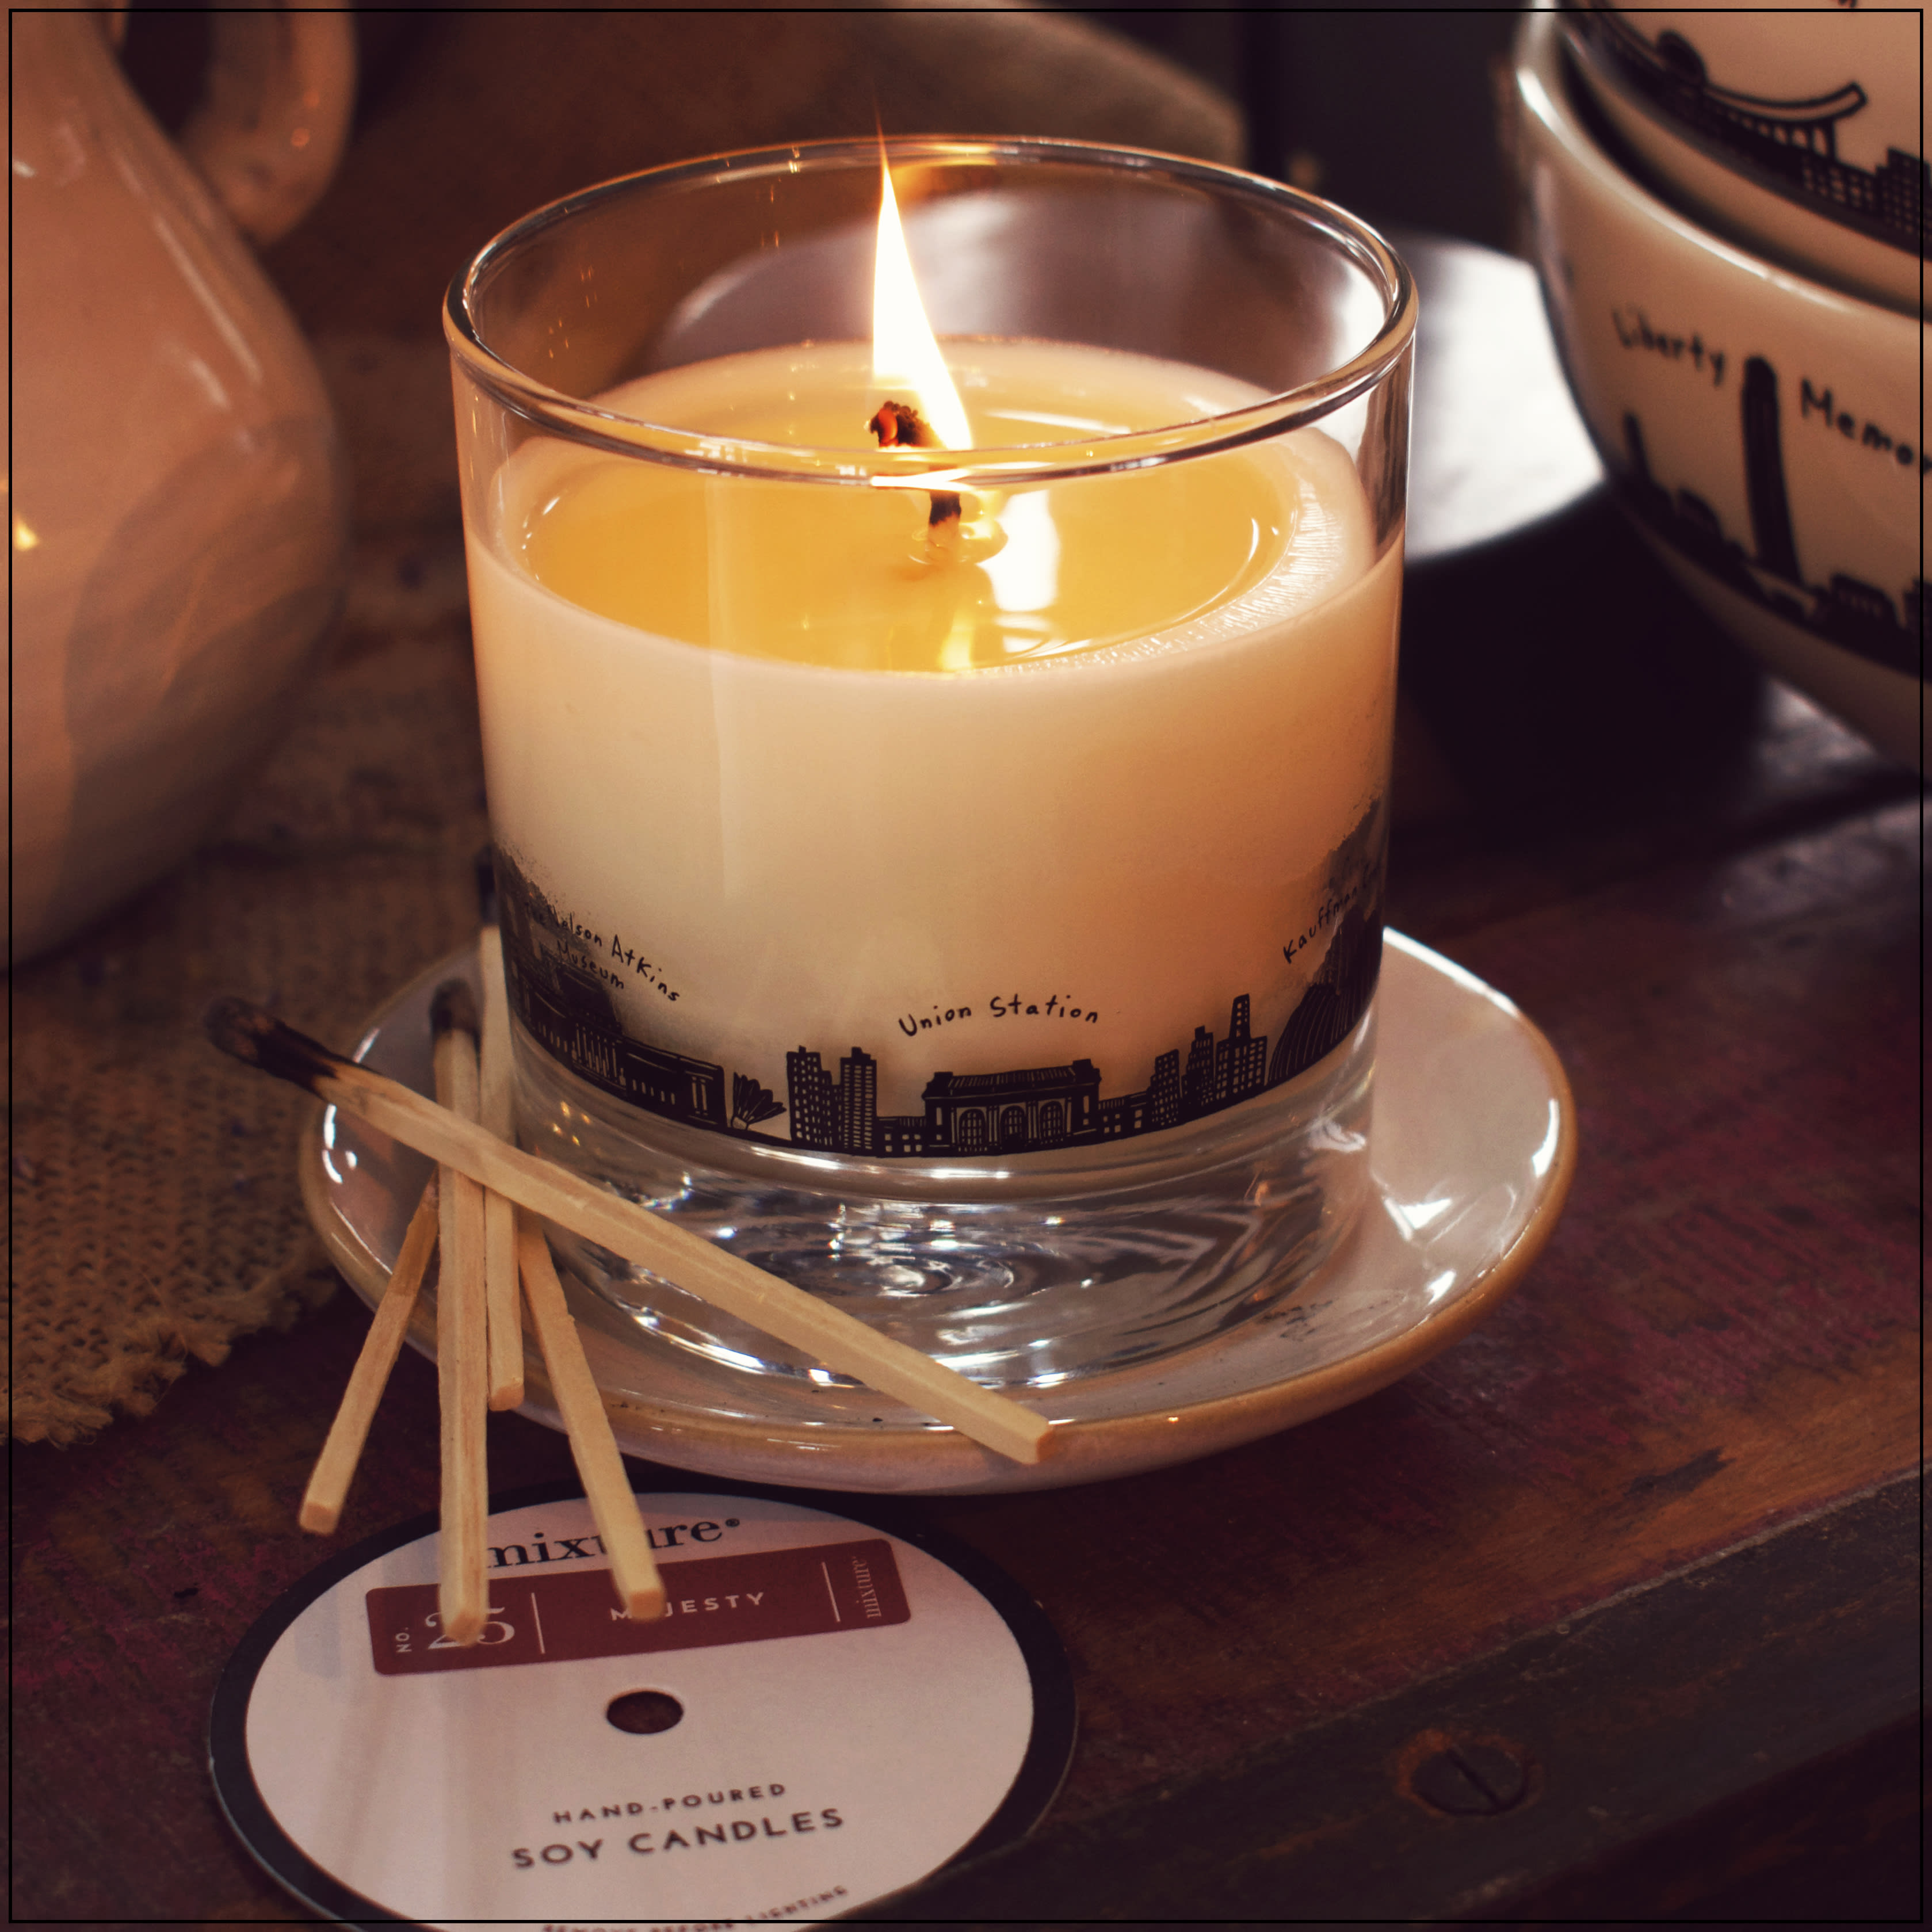  French Magnolia- Exclusive KC Candle - Our Exclusive Kansas City Skyline is now on a cute little glass filled by Local Candle Company Mixture.  French Magnolia- The intoxicating blend of magnolia, violets, and spicy verbena. Finishes with tuberose and pink pepper. Radiant